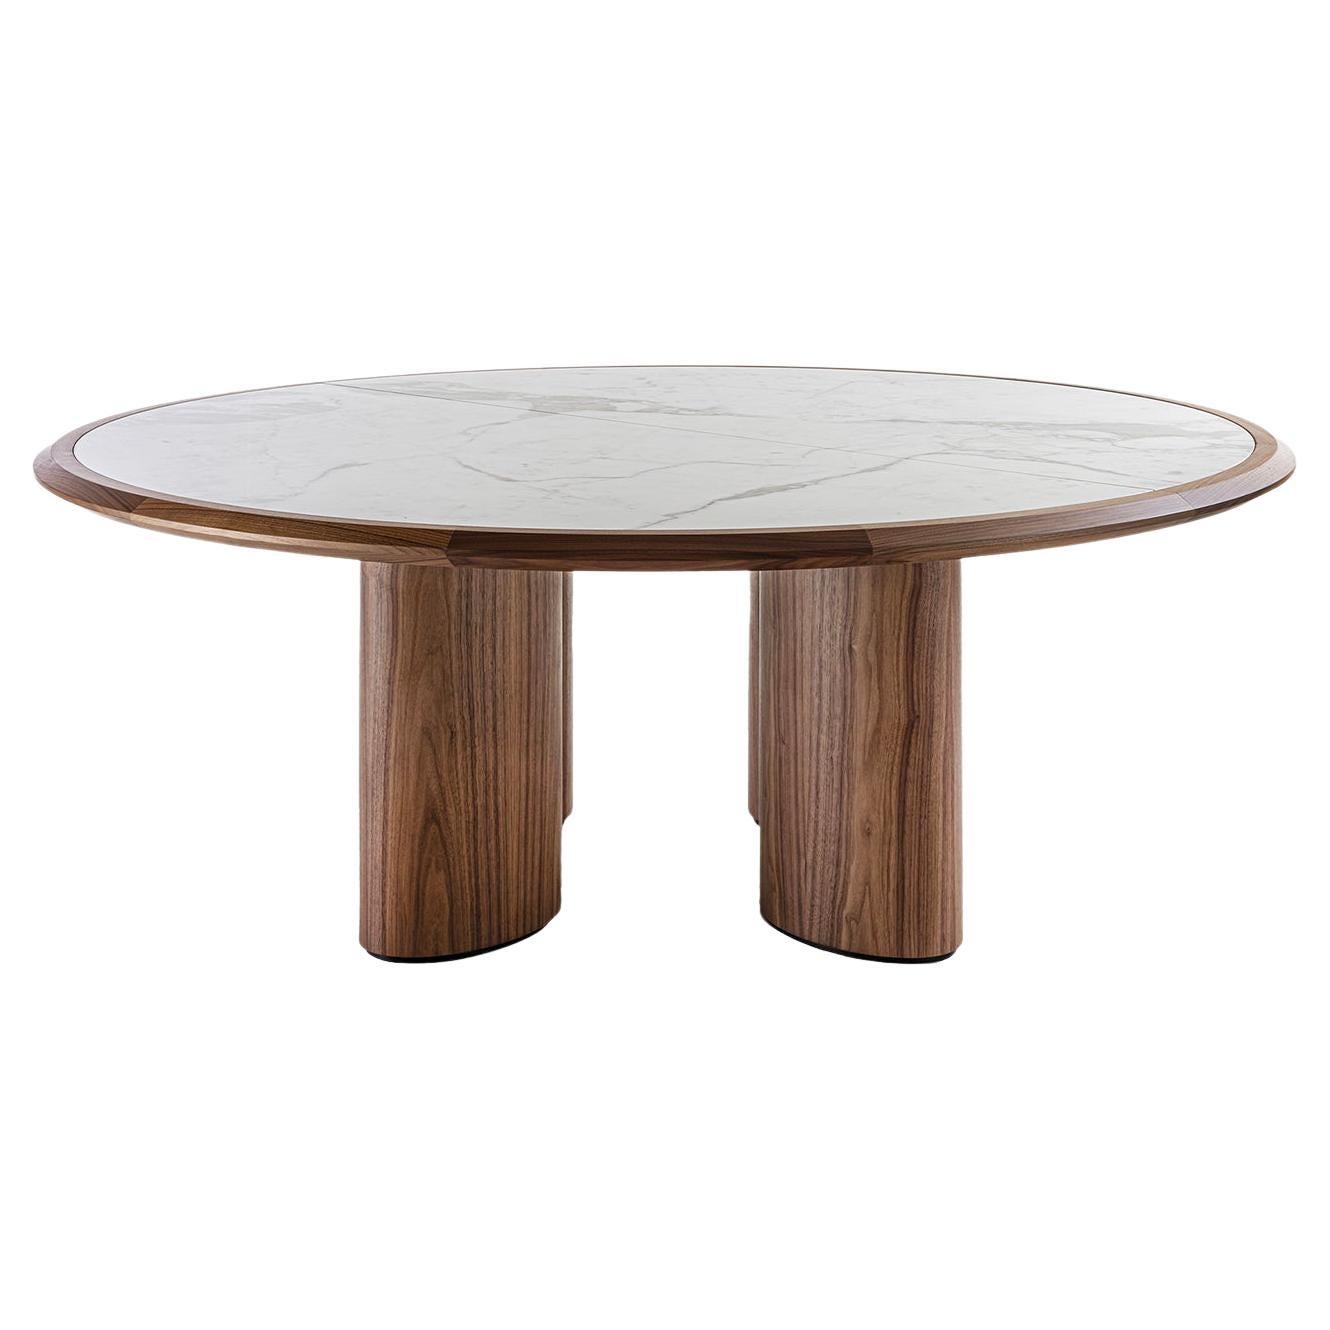 Diamante Round Canaletto Carrara Marble Table For Sale